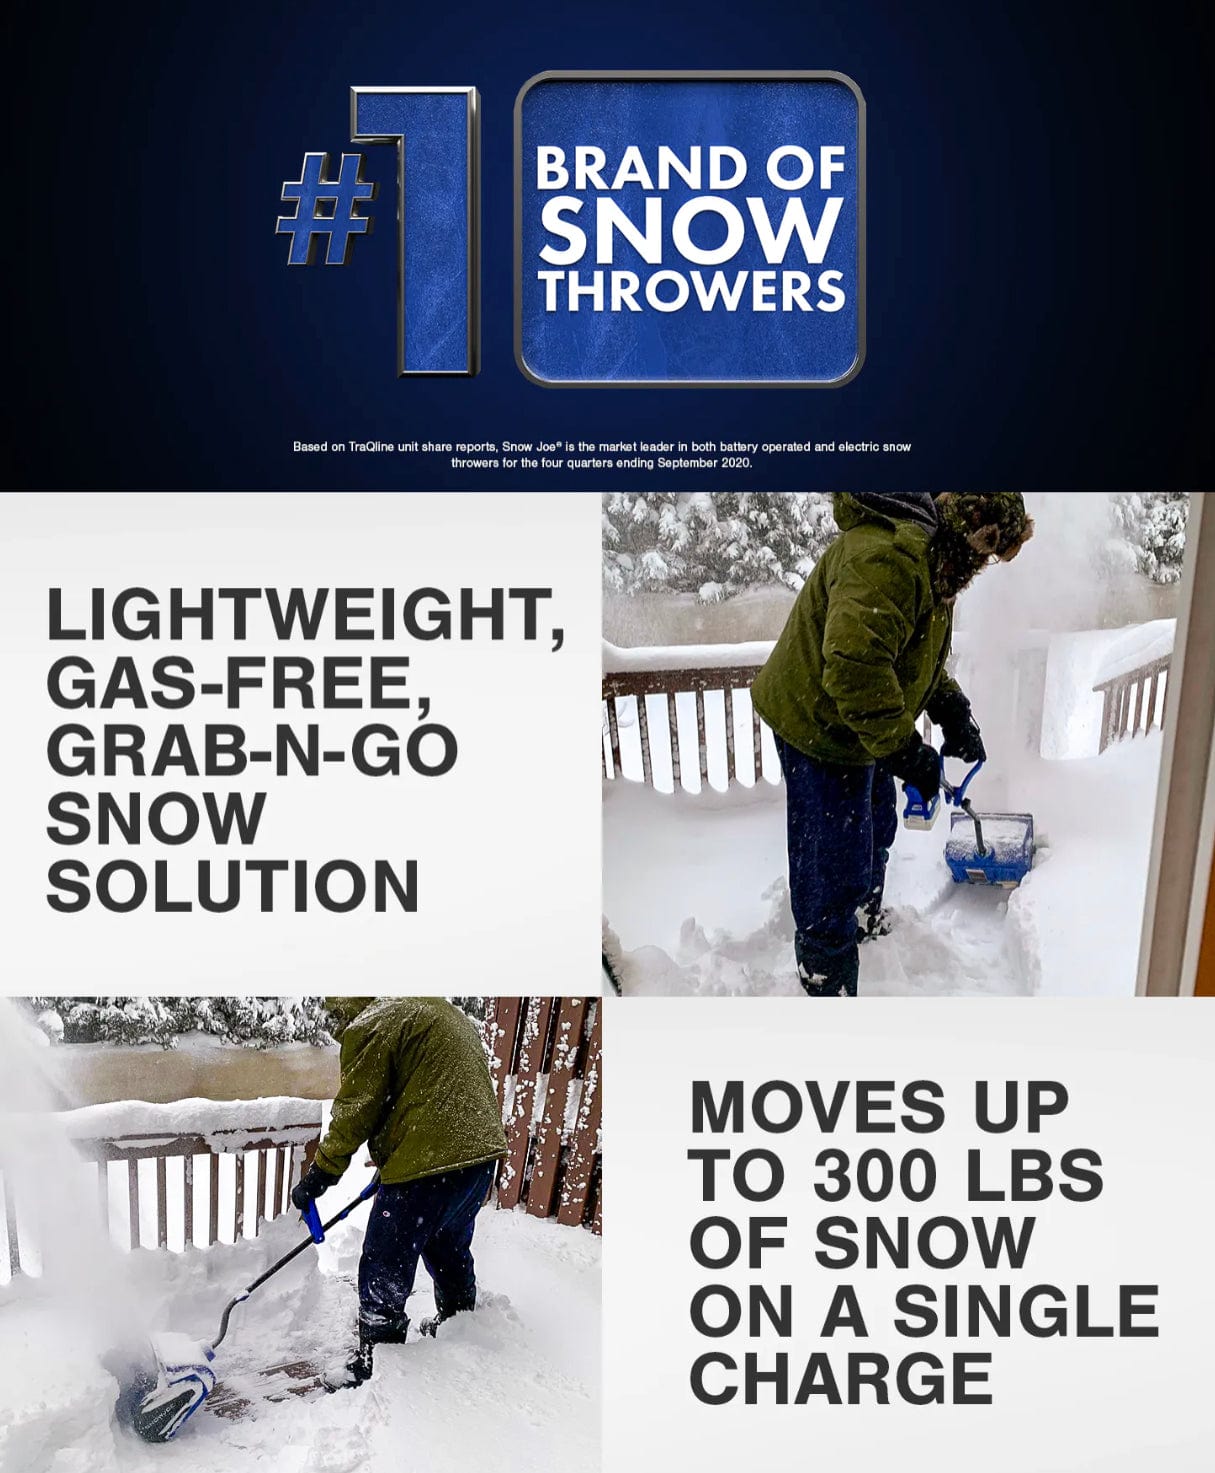 On The Go Instant Snow – Dales Clothing Inc